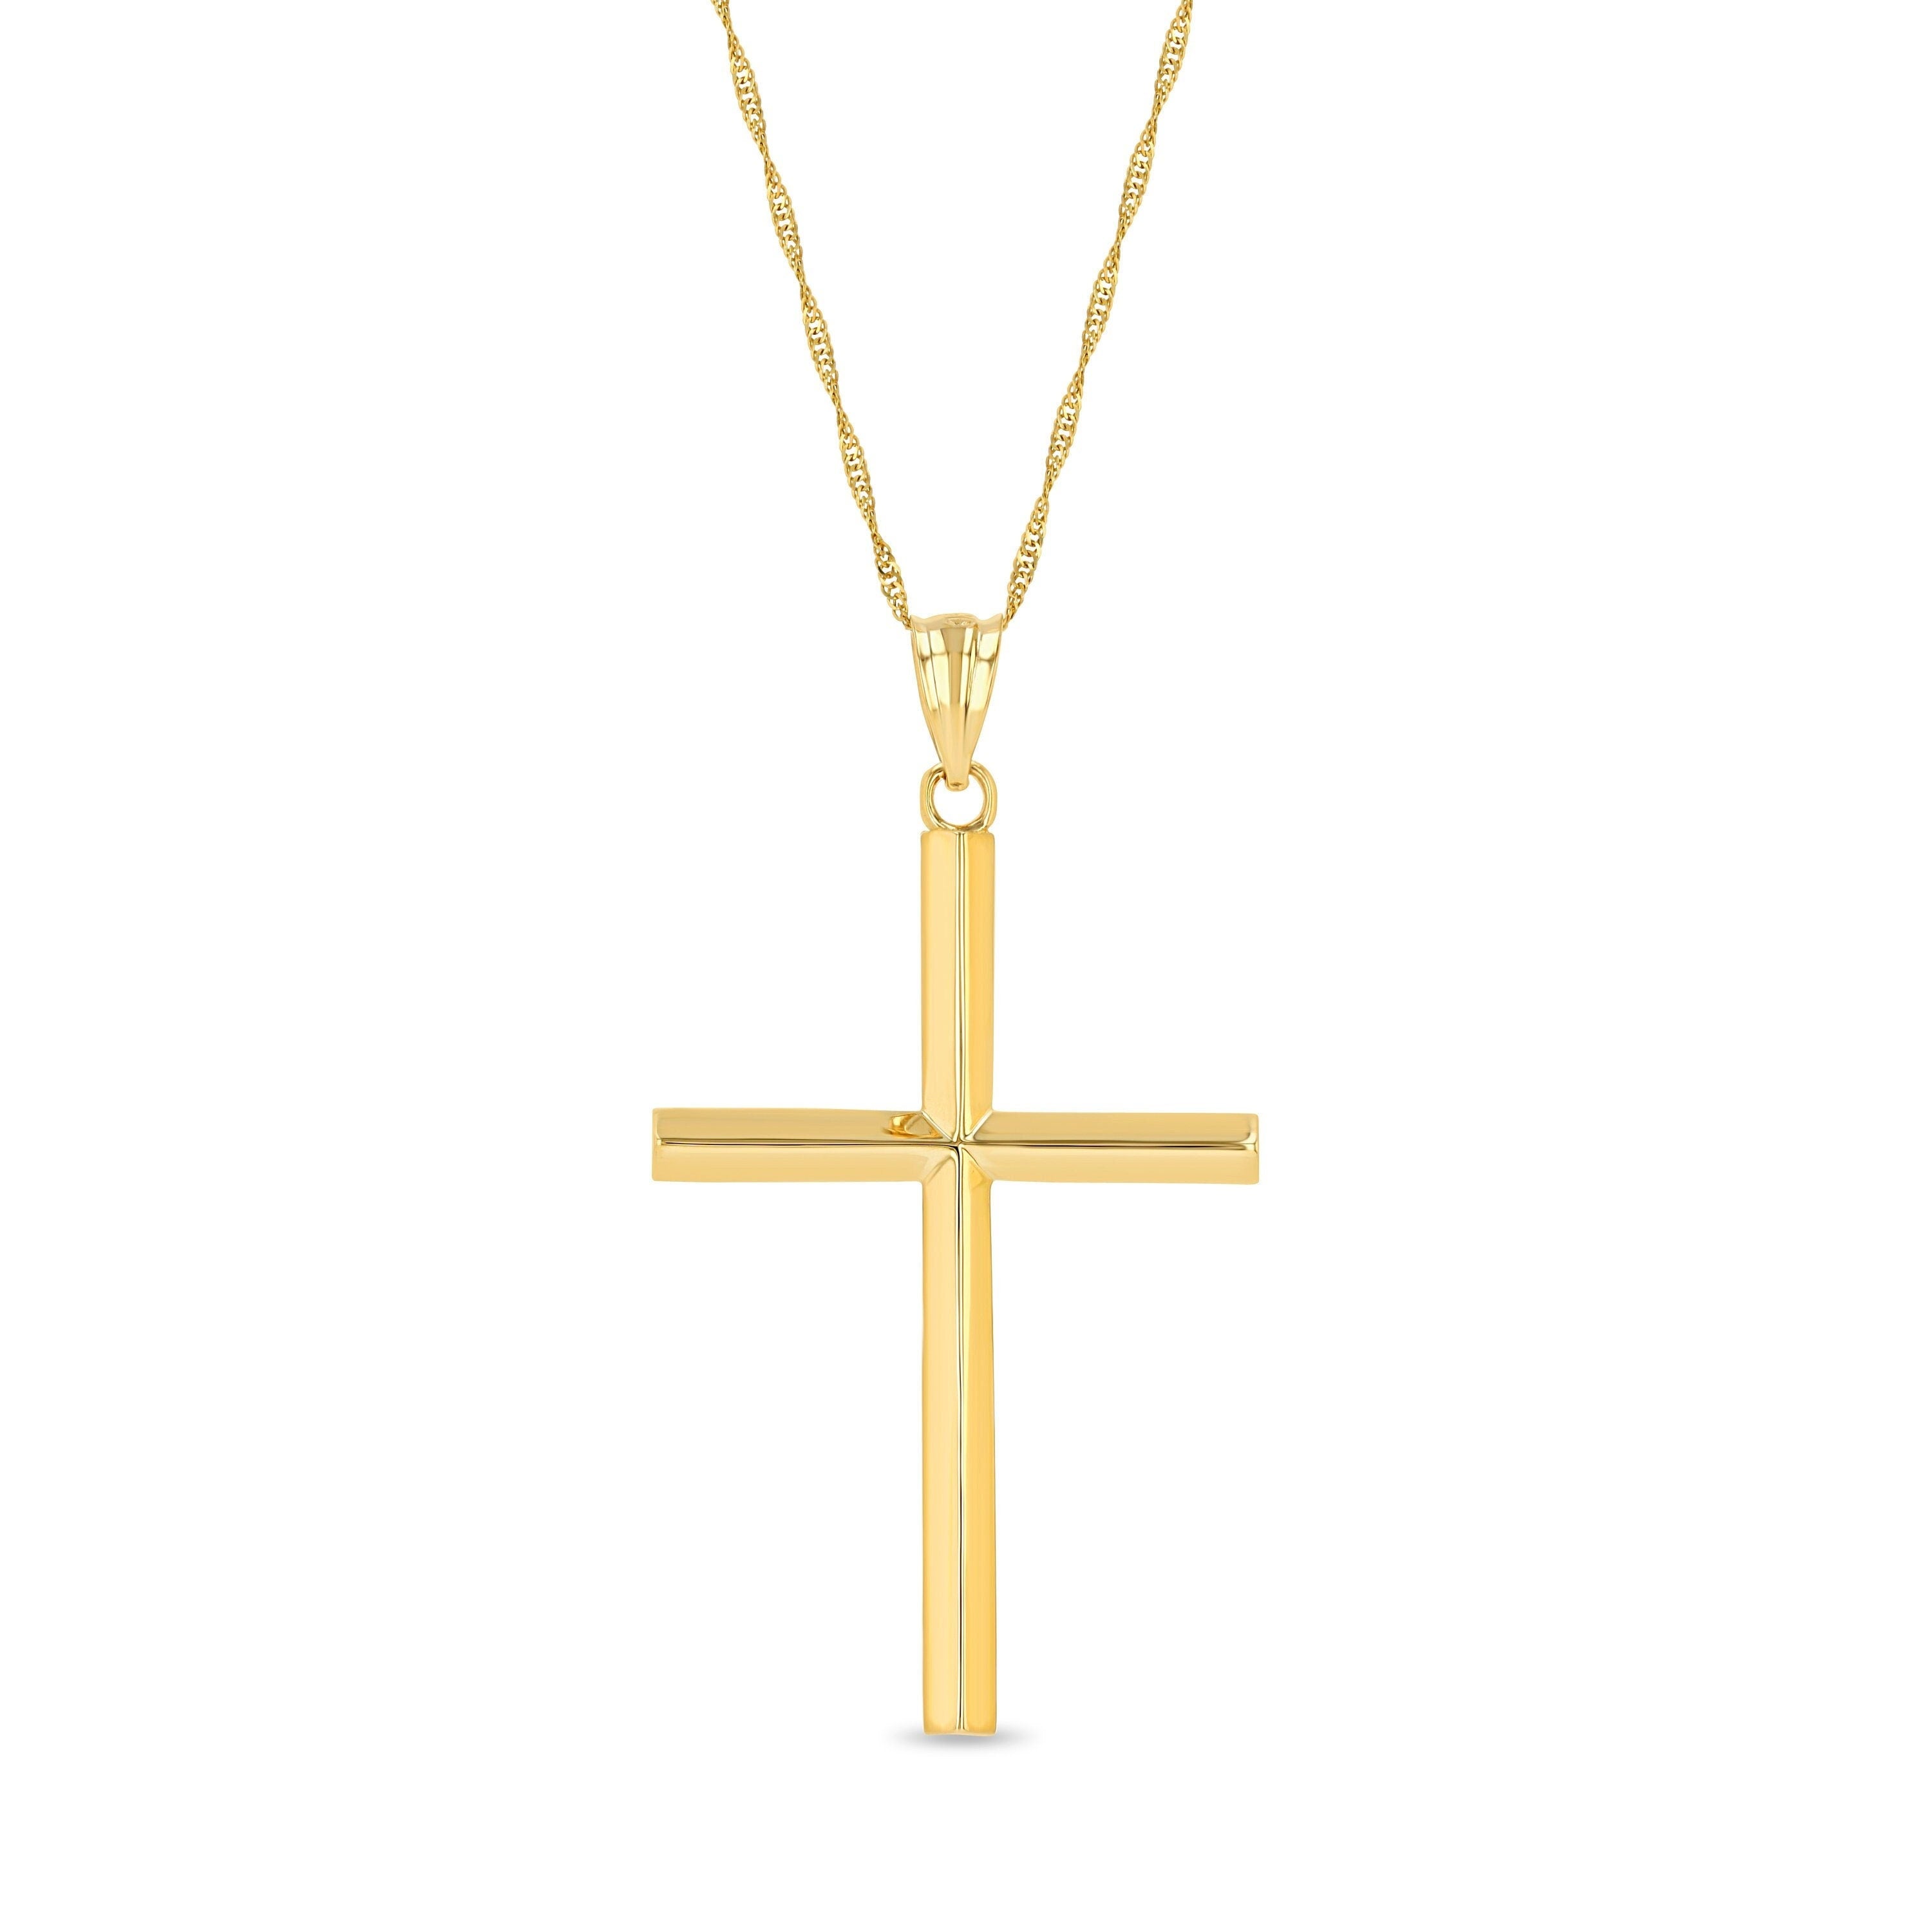 14k solid gold high polish cross pendant on 18" solid gold chain